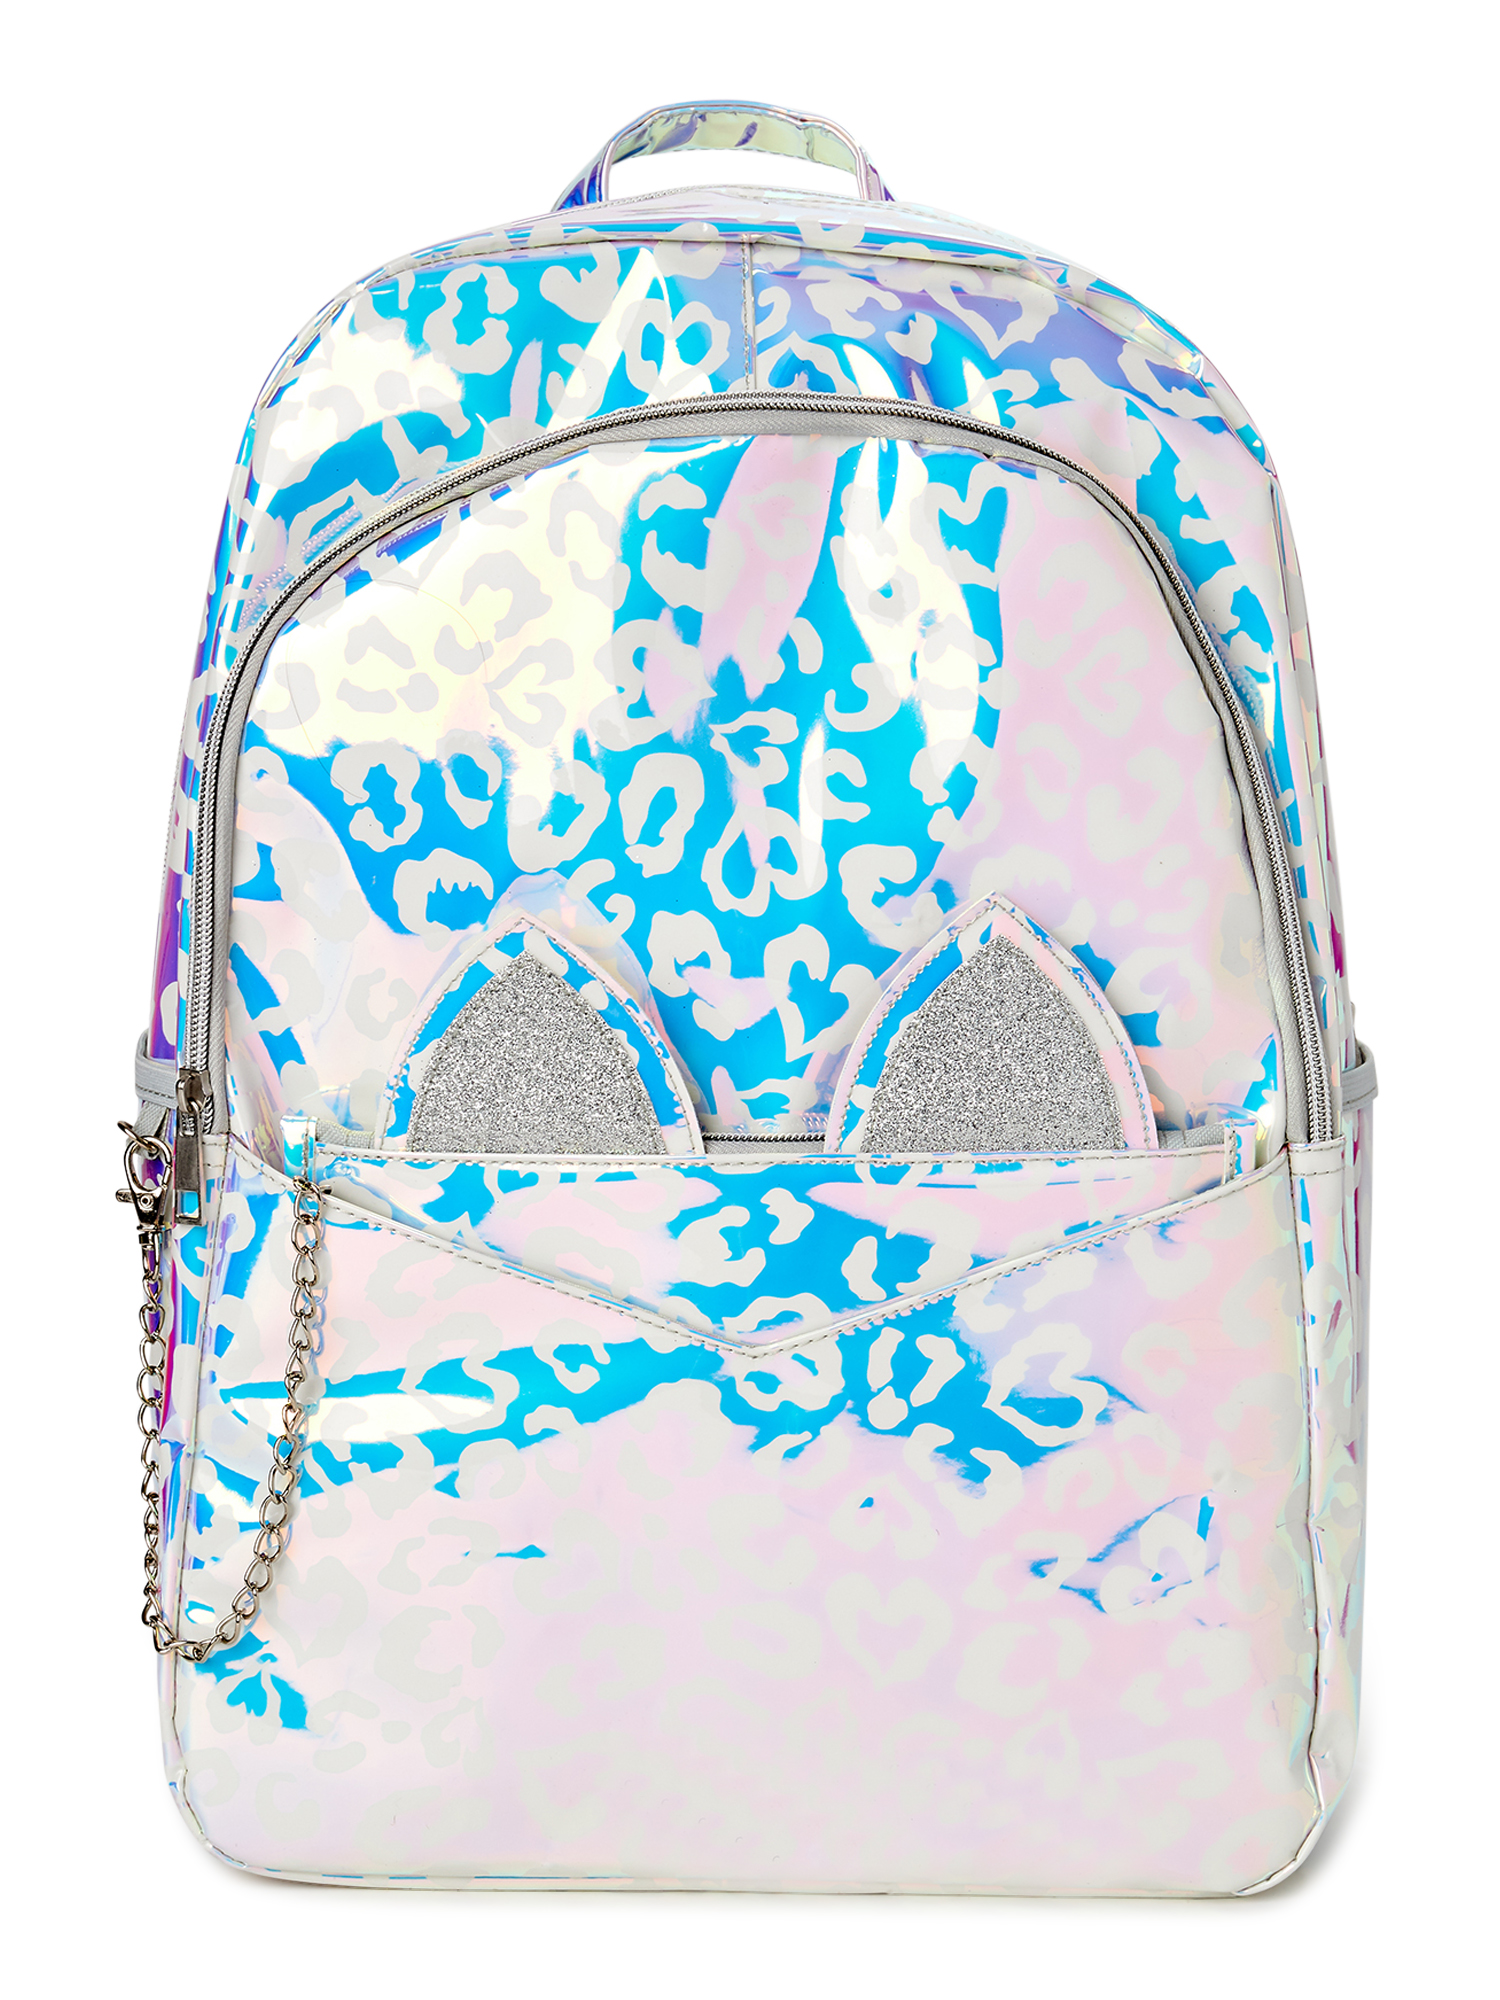 Wonder Nation Critters Iridescent Kitty Backpack Set, 2-Piece - image 1 of 6